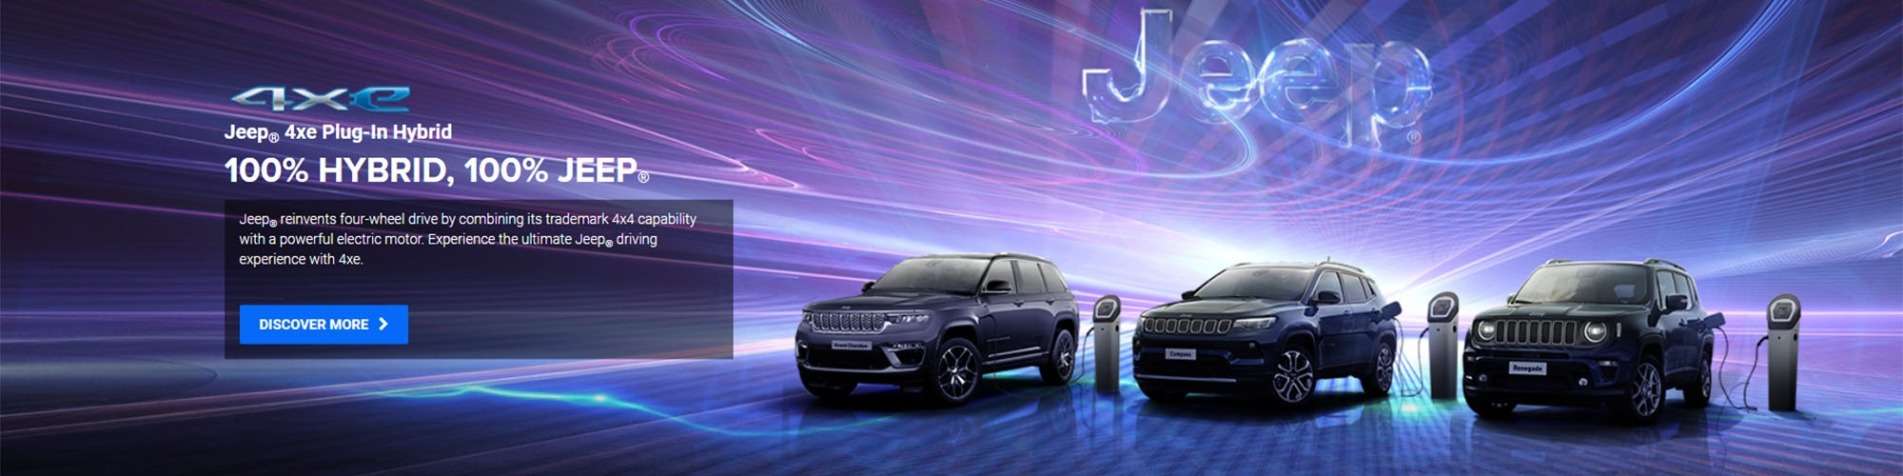 Jeep 4xe Plug-in Hybrid Banner